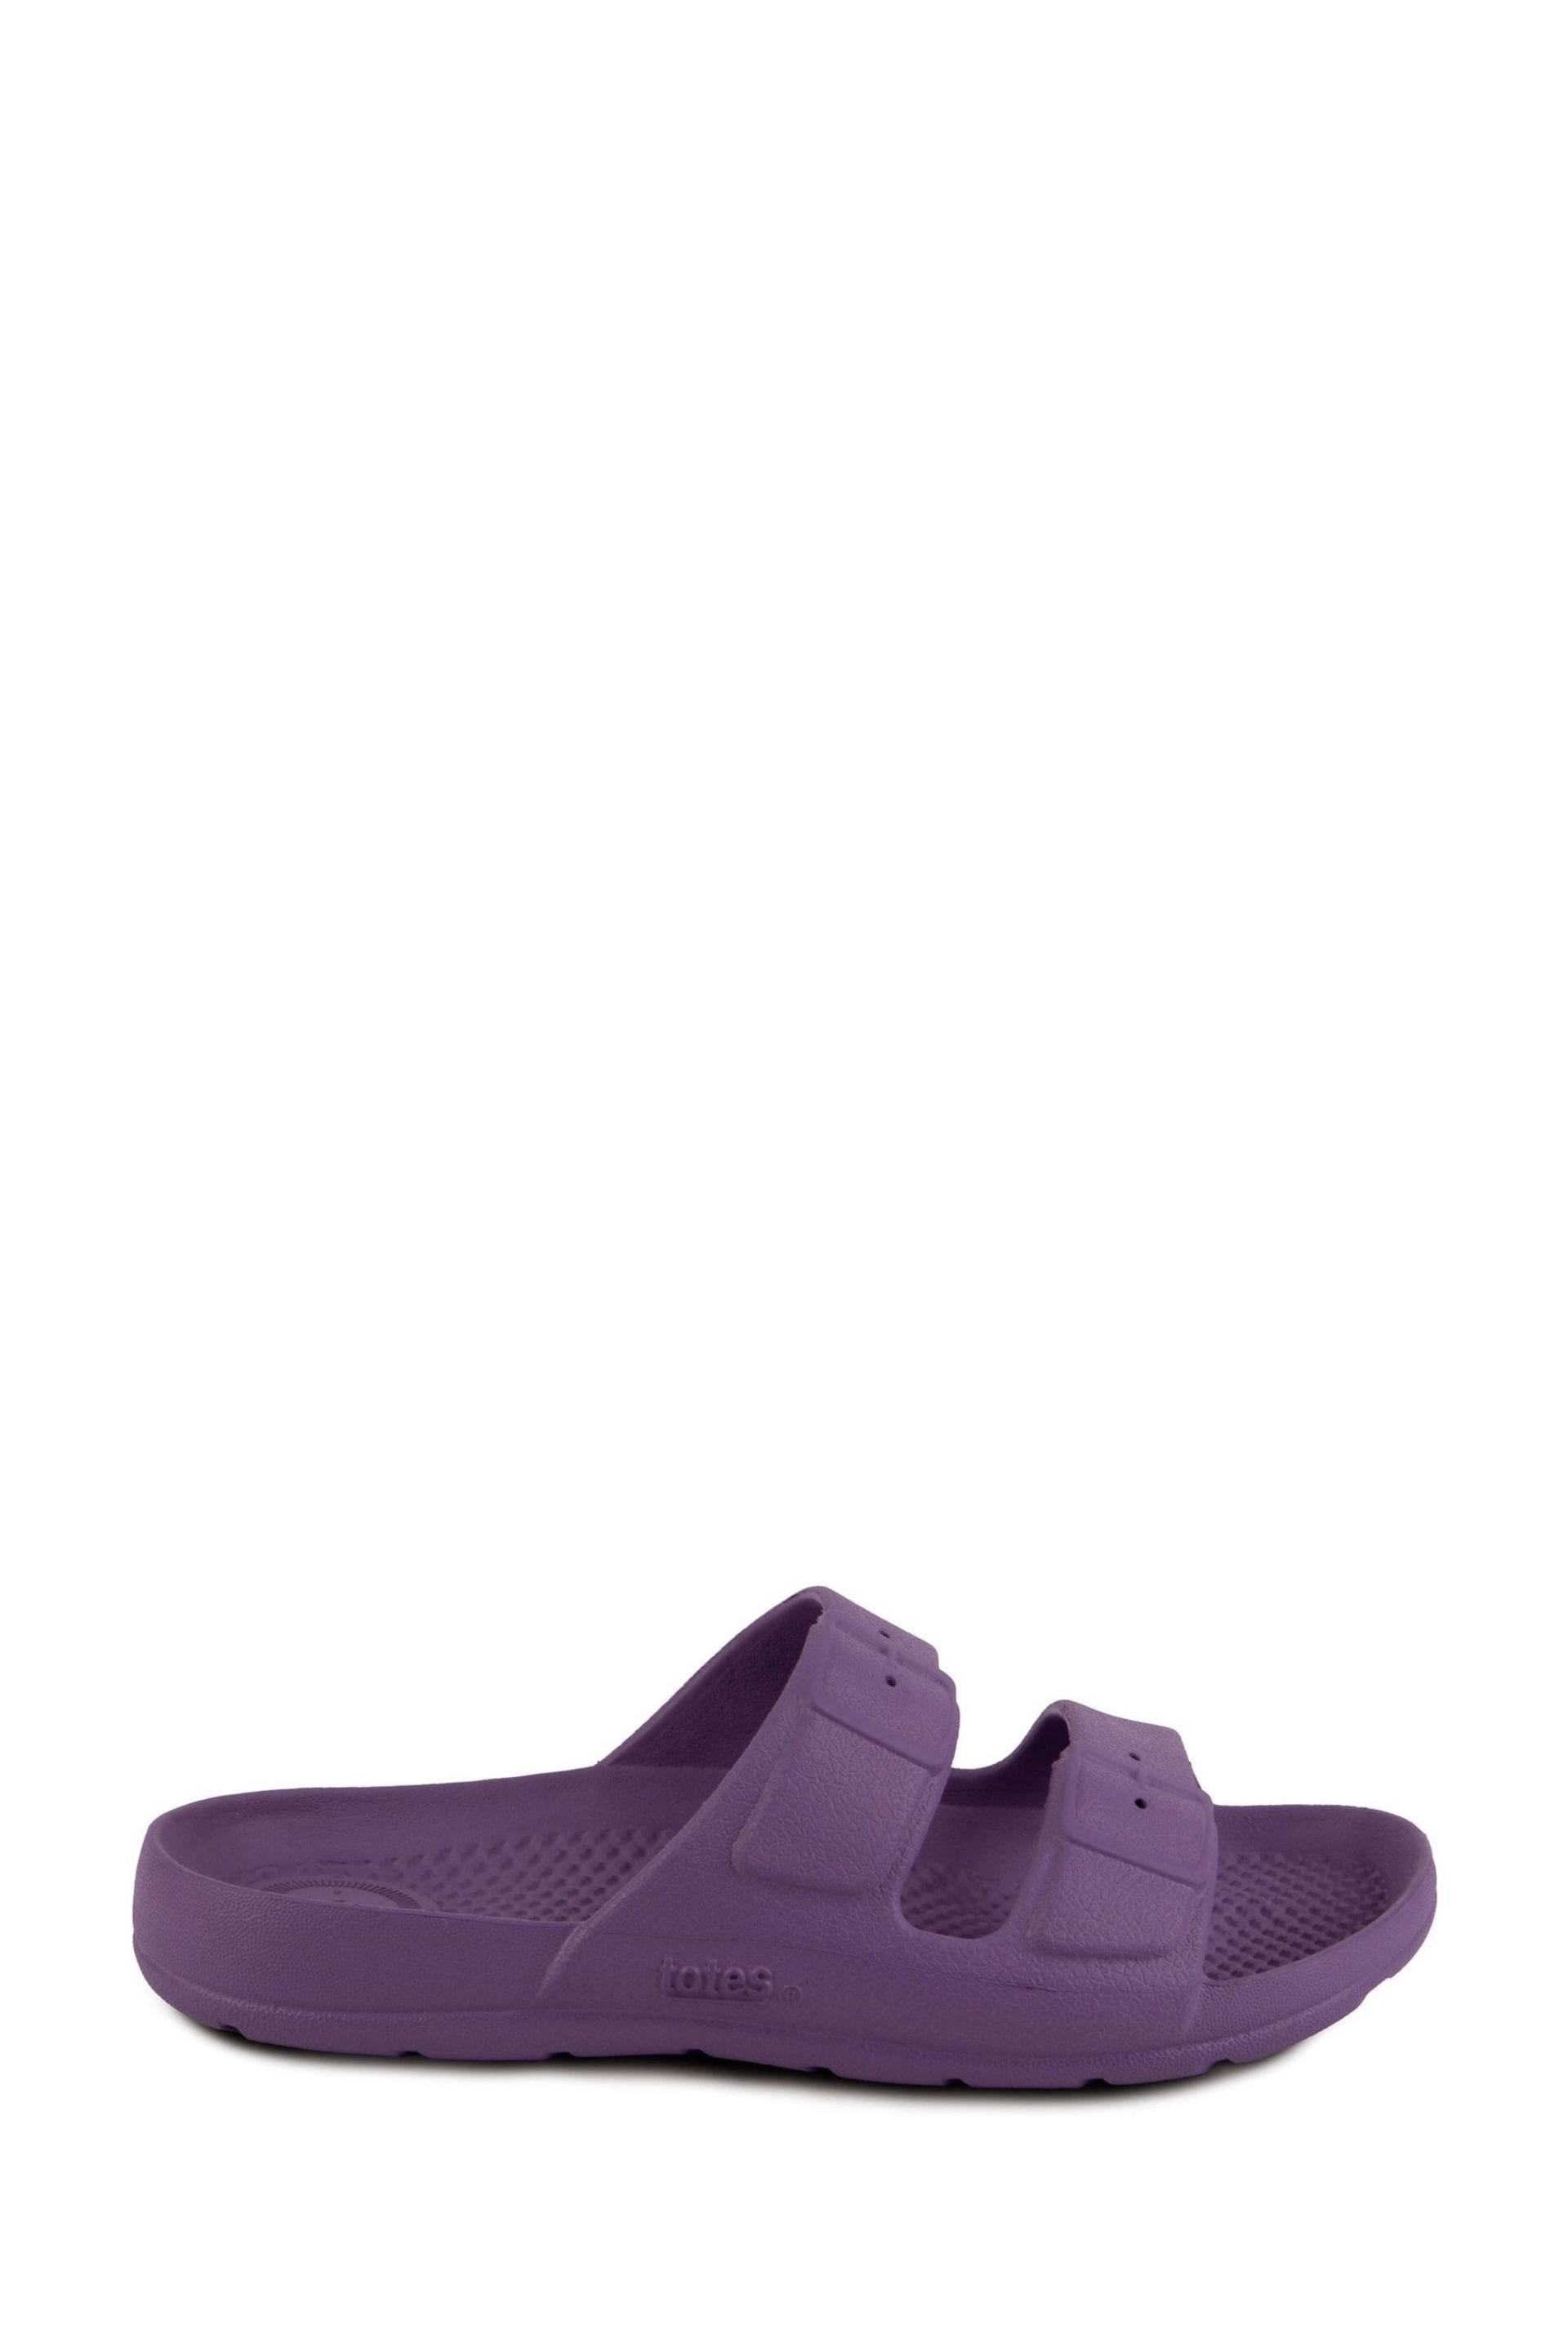 Totes Purple Kids Solbounce Moulded Double Buckle Slides - Image 1 of 5